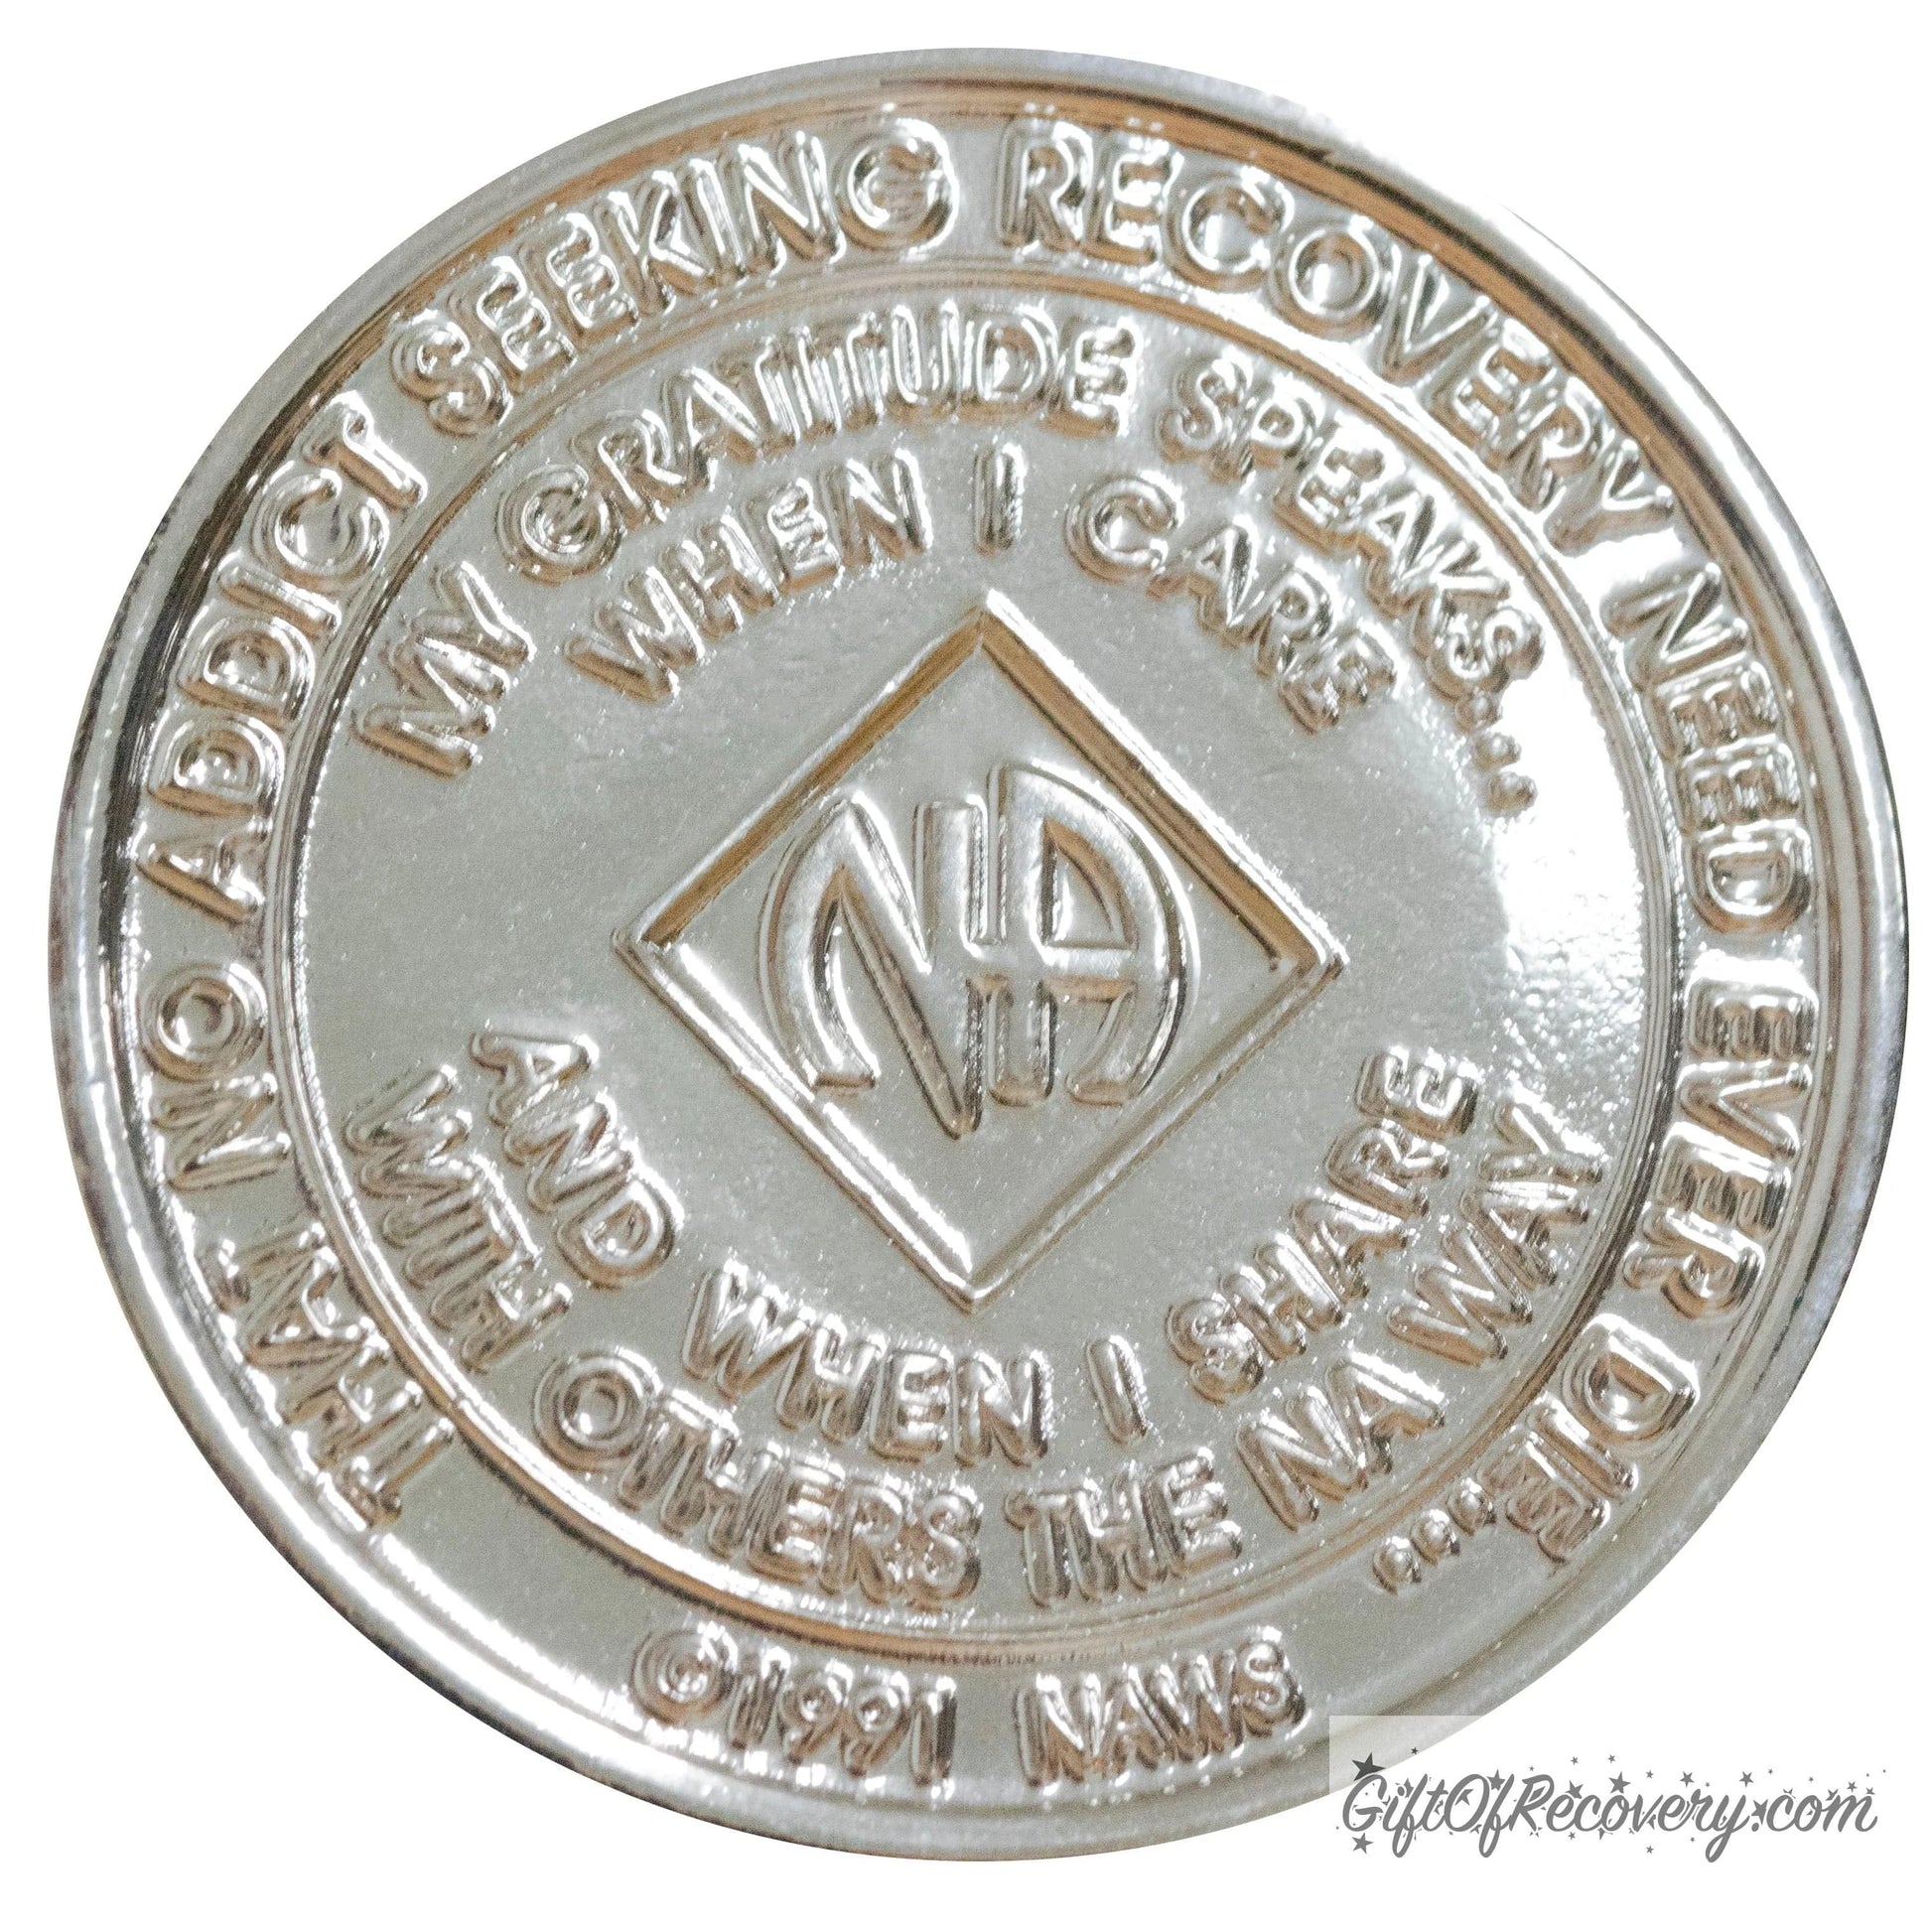 Clean Time Chip Narcotics Anonymous Diamond Shaped Crystal (Diamond)